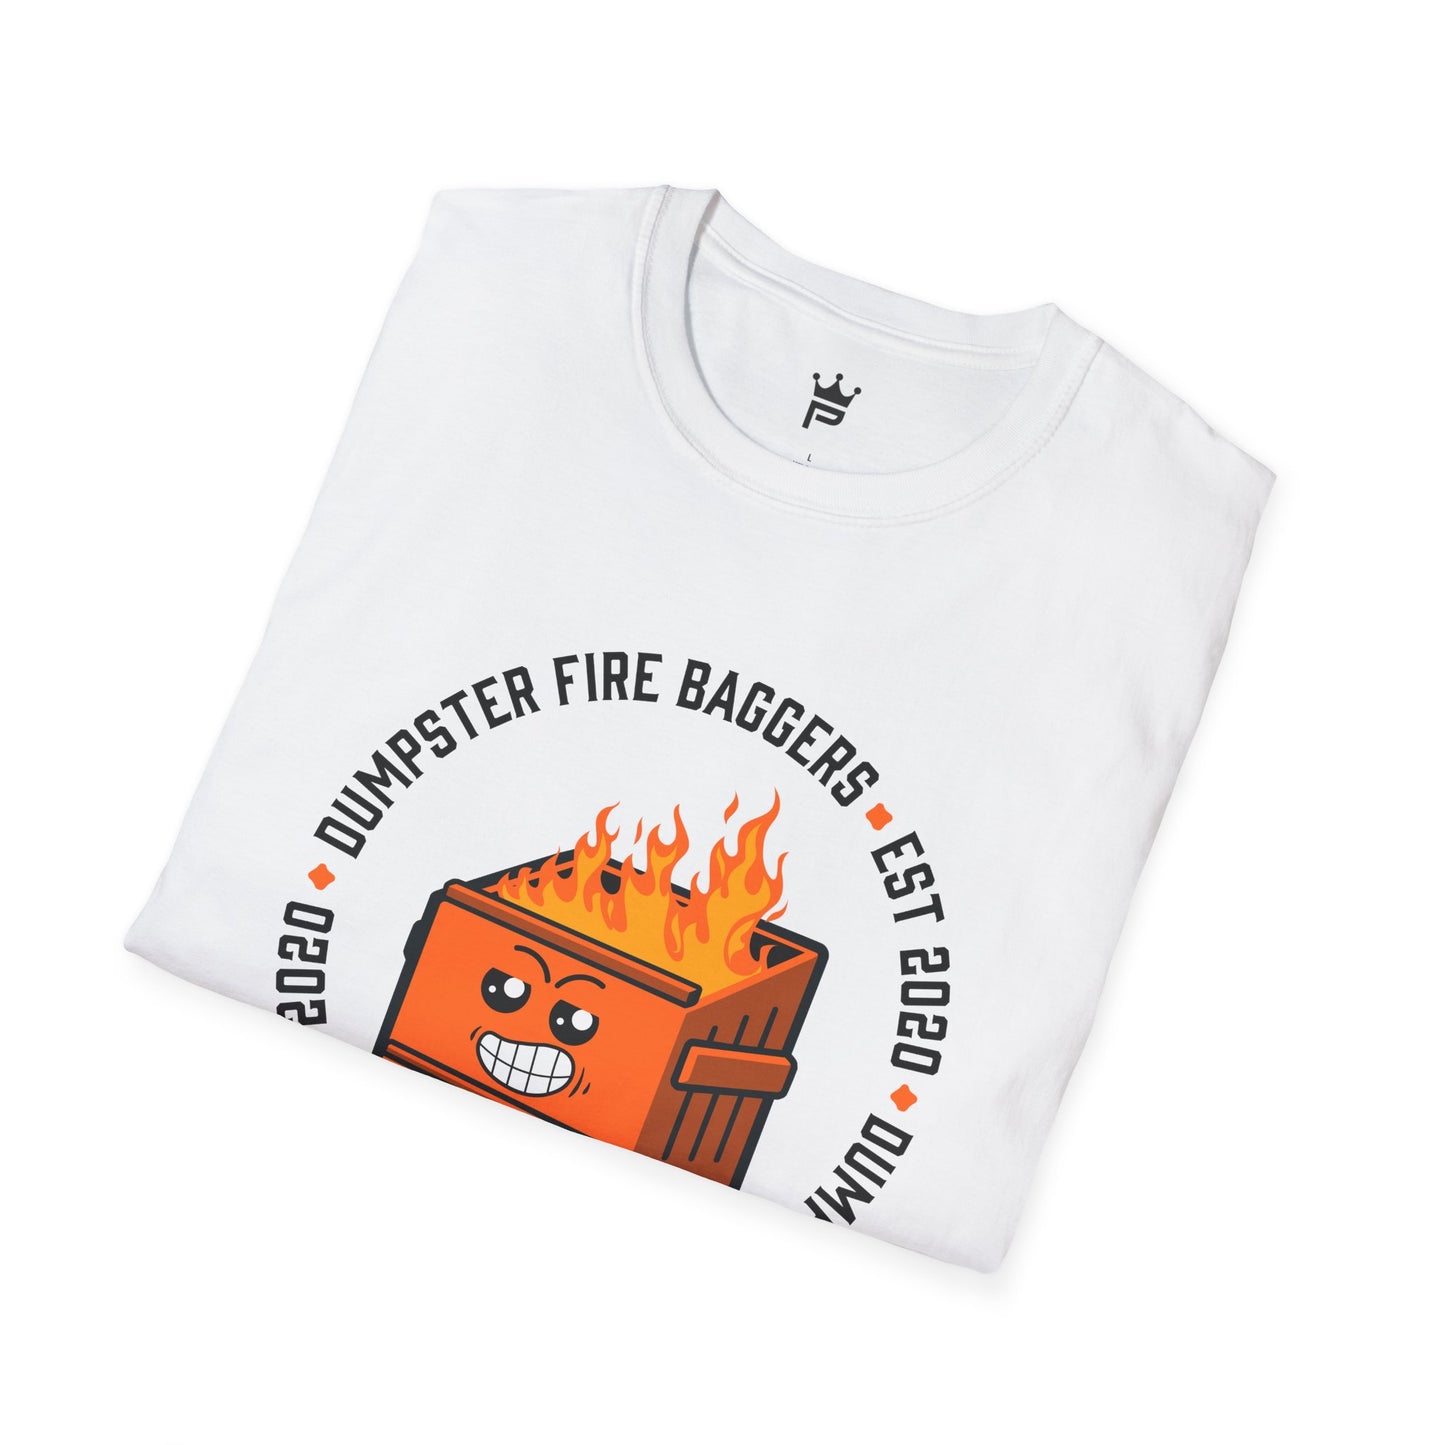 DFB ANGRY DUMPSTER T-SHIRT